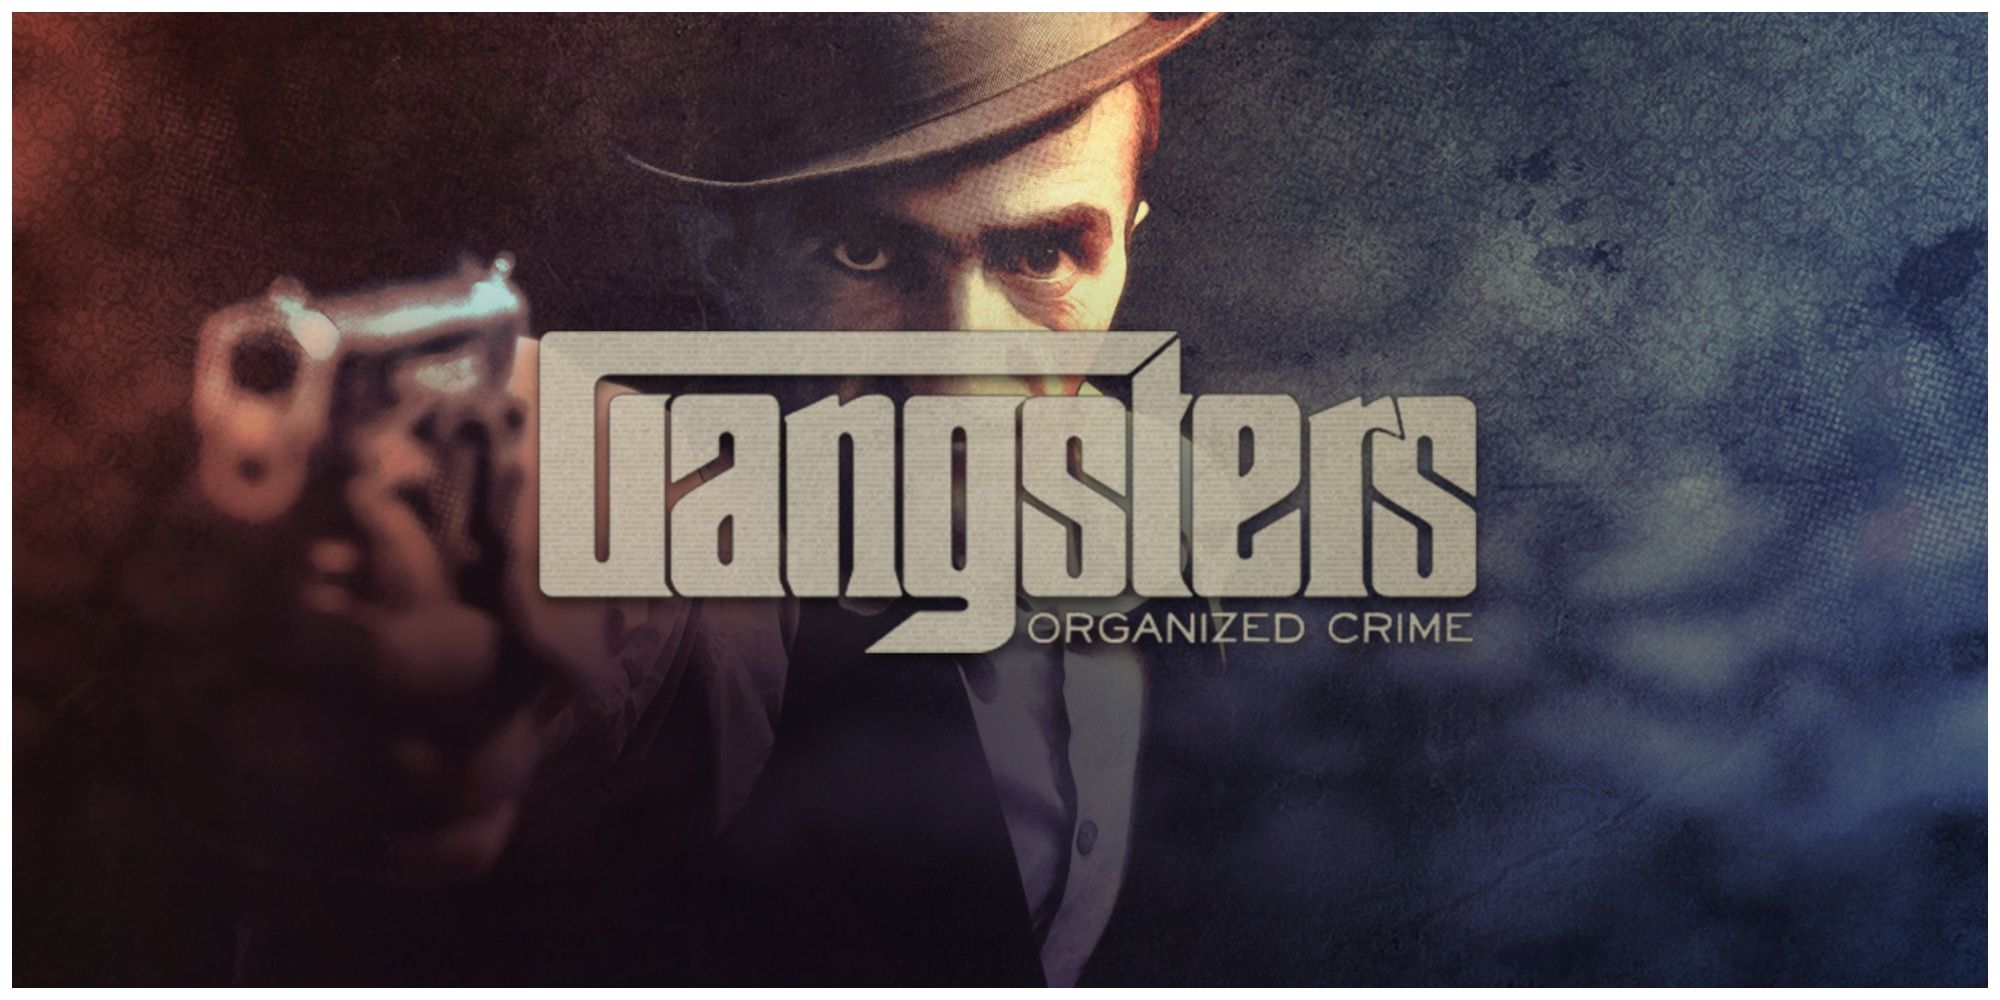 Gangsters: Organized Crime title art